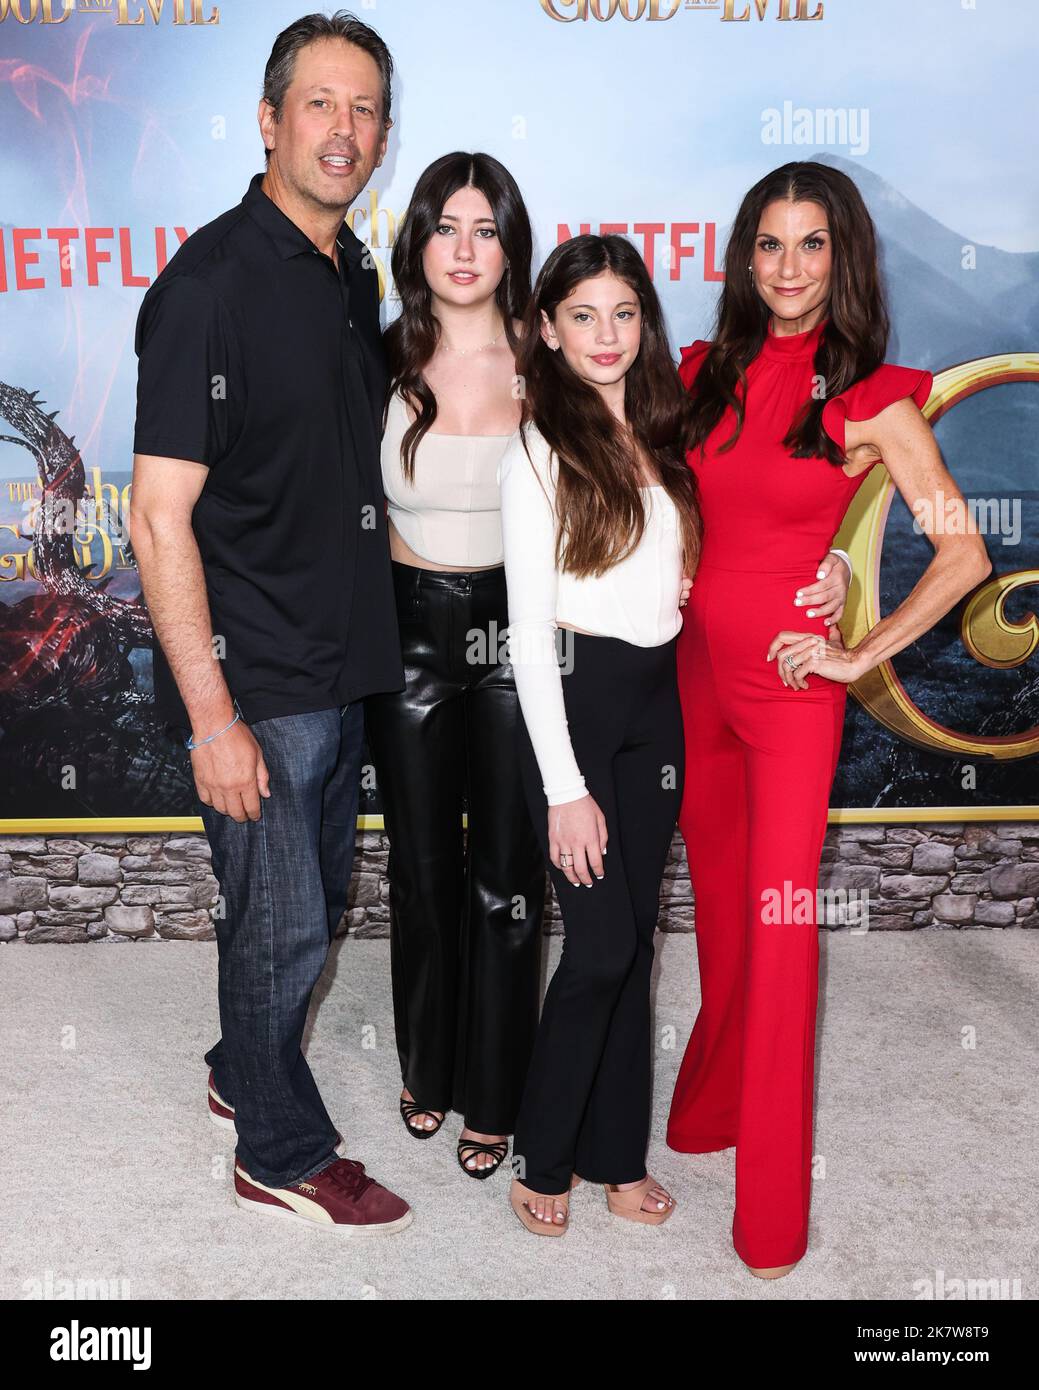 WESTWOOD, LOS ANGELES, CALIFORNIA, USA - OCTOBER 18: Michael Hess and Samantha Harris arrive at the World Premiere Of Netflix's 'The School For Good And Evil' held at Regency Village Theatre on October 18, 2022 in Westwood, Los Angeles, California, United States. (Photo by Xavier Collin/Image Press Agency) Stock Photo